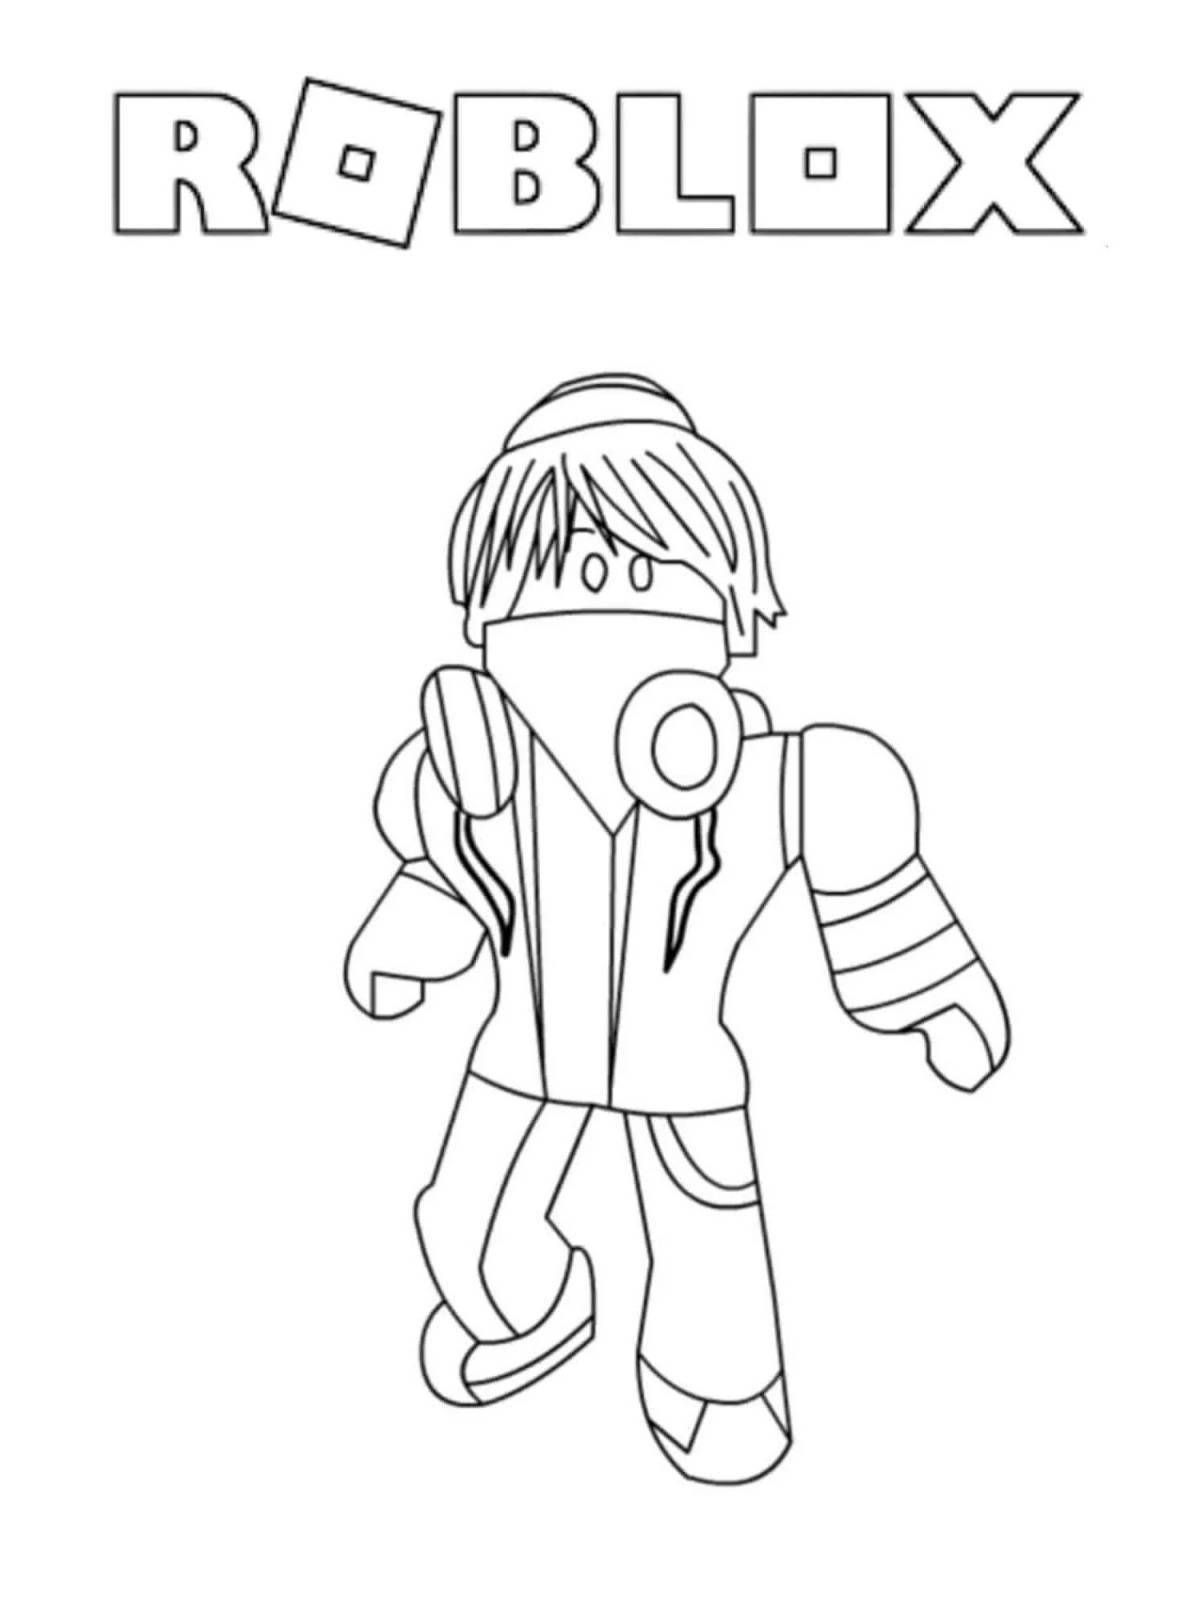 Charming roblox body coloring page